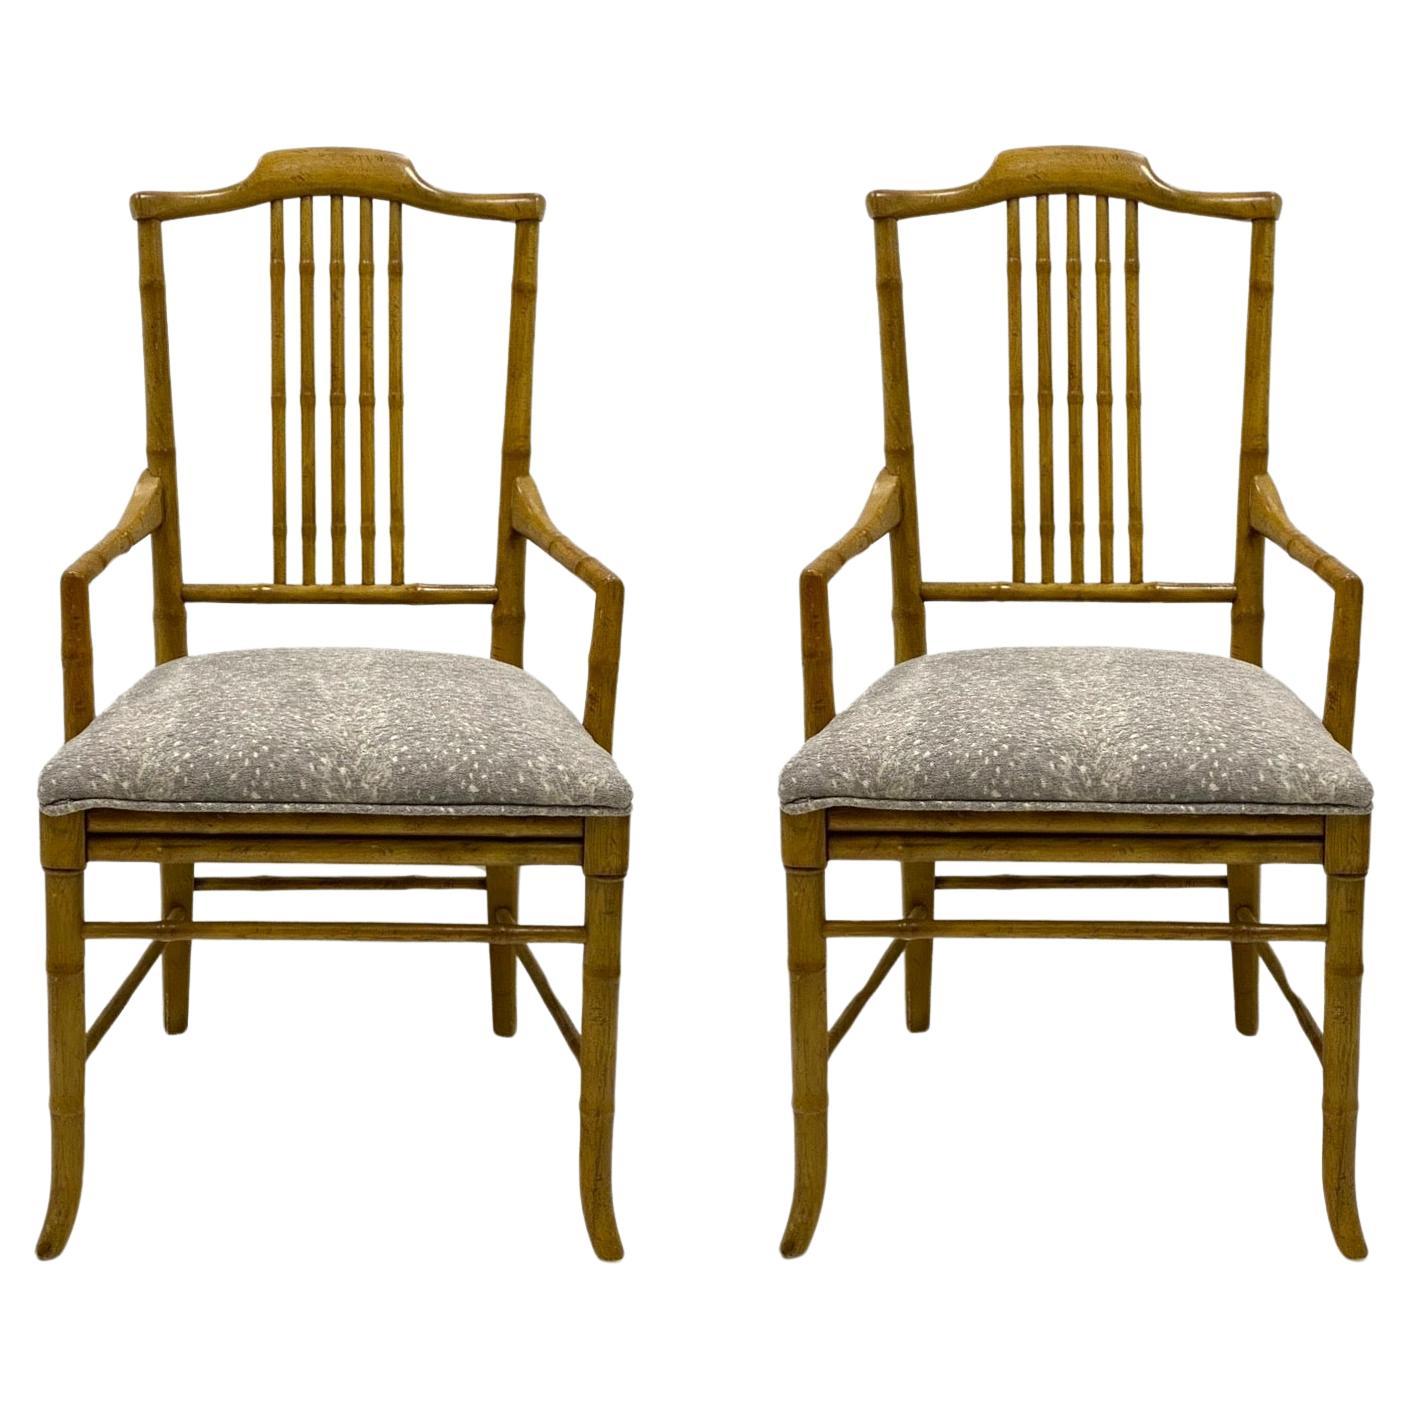 1970s Regency Style Faux Bamboo Bergere Armchairs In Grey Fawn Upholstery -Pair